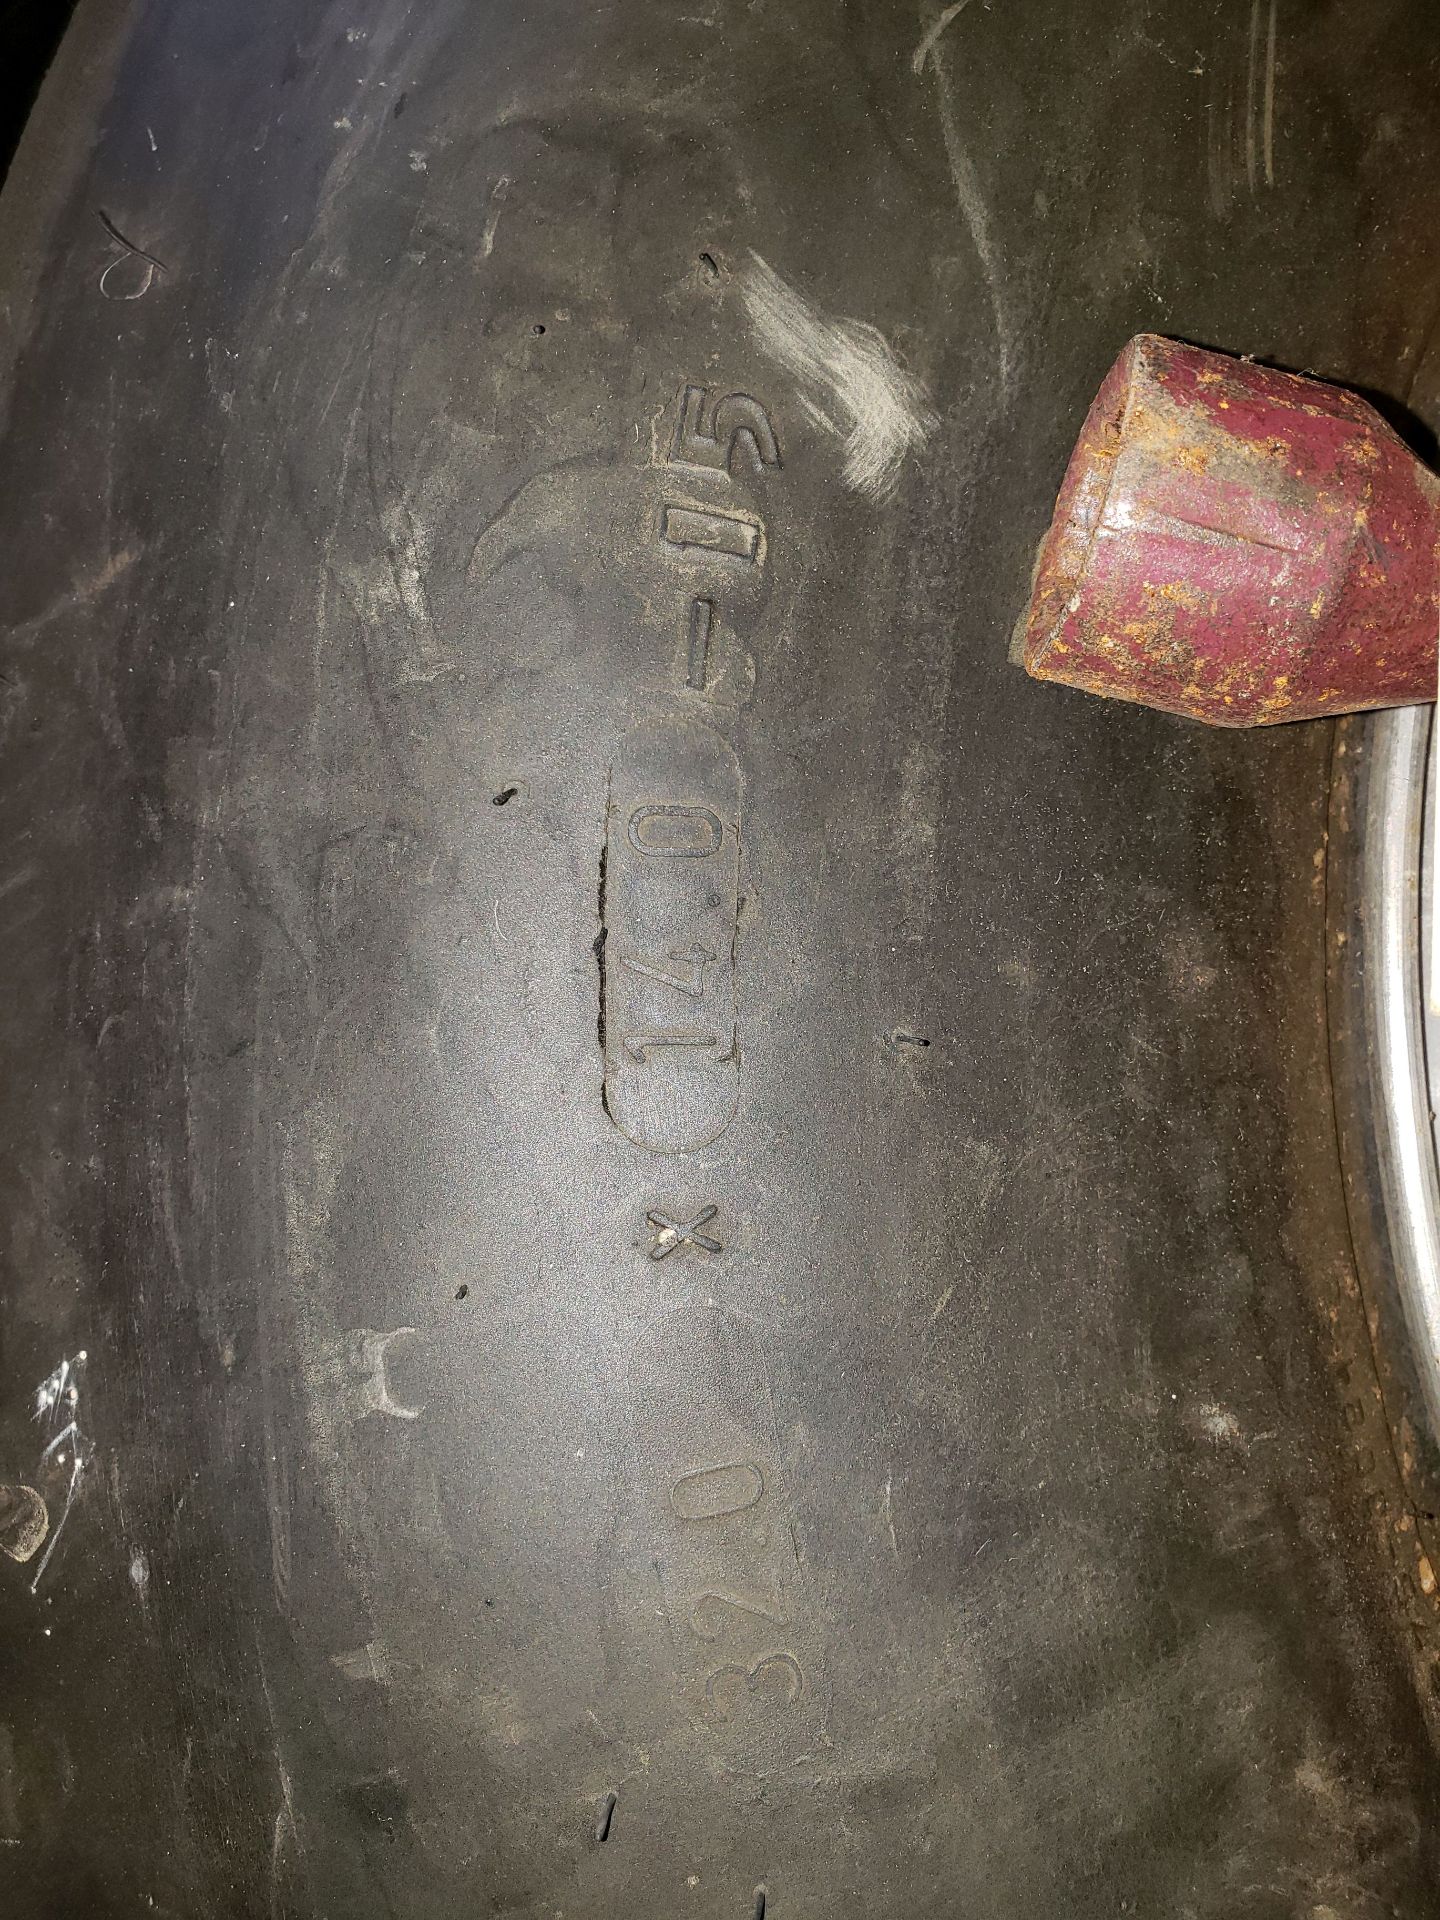 TWO GOODYEAR EAGLE SLICKS 32.0x14.0-15 ON WELD - Image 3 of 4